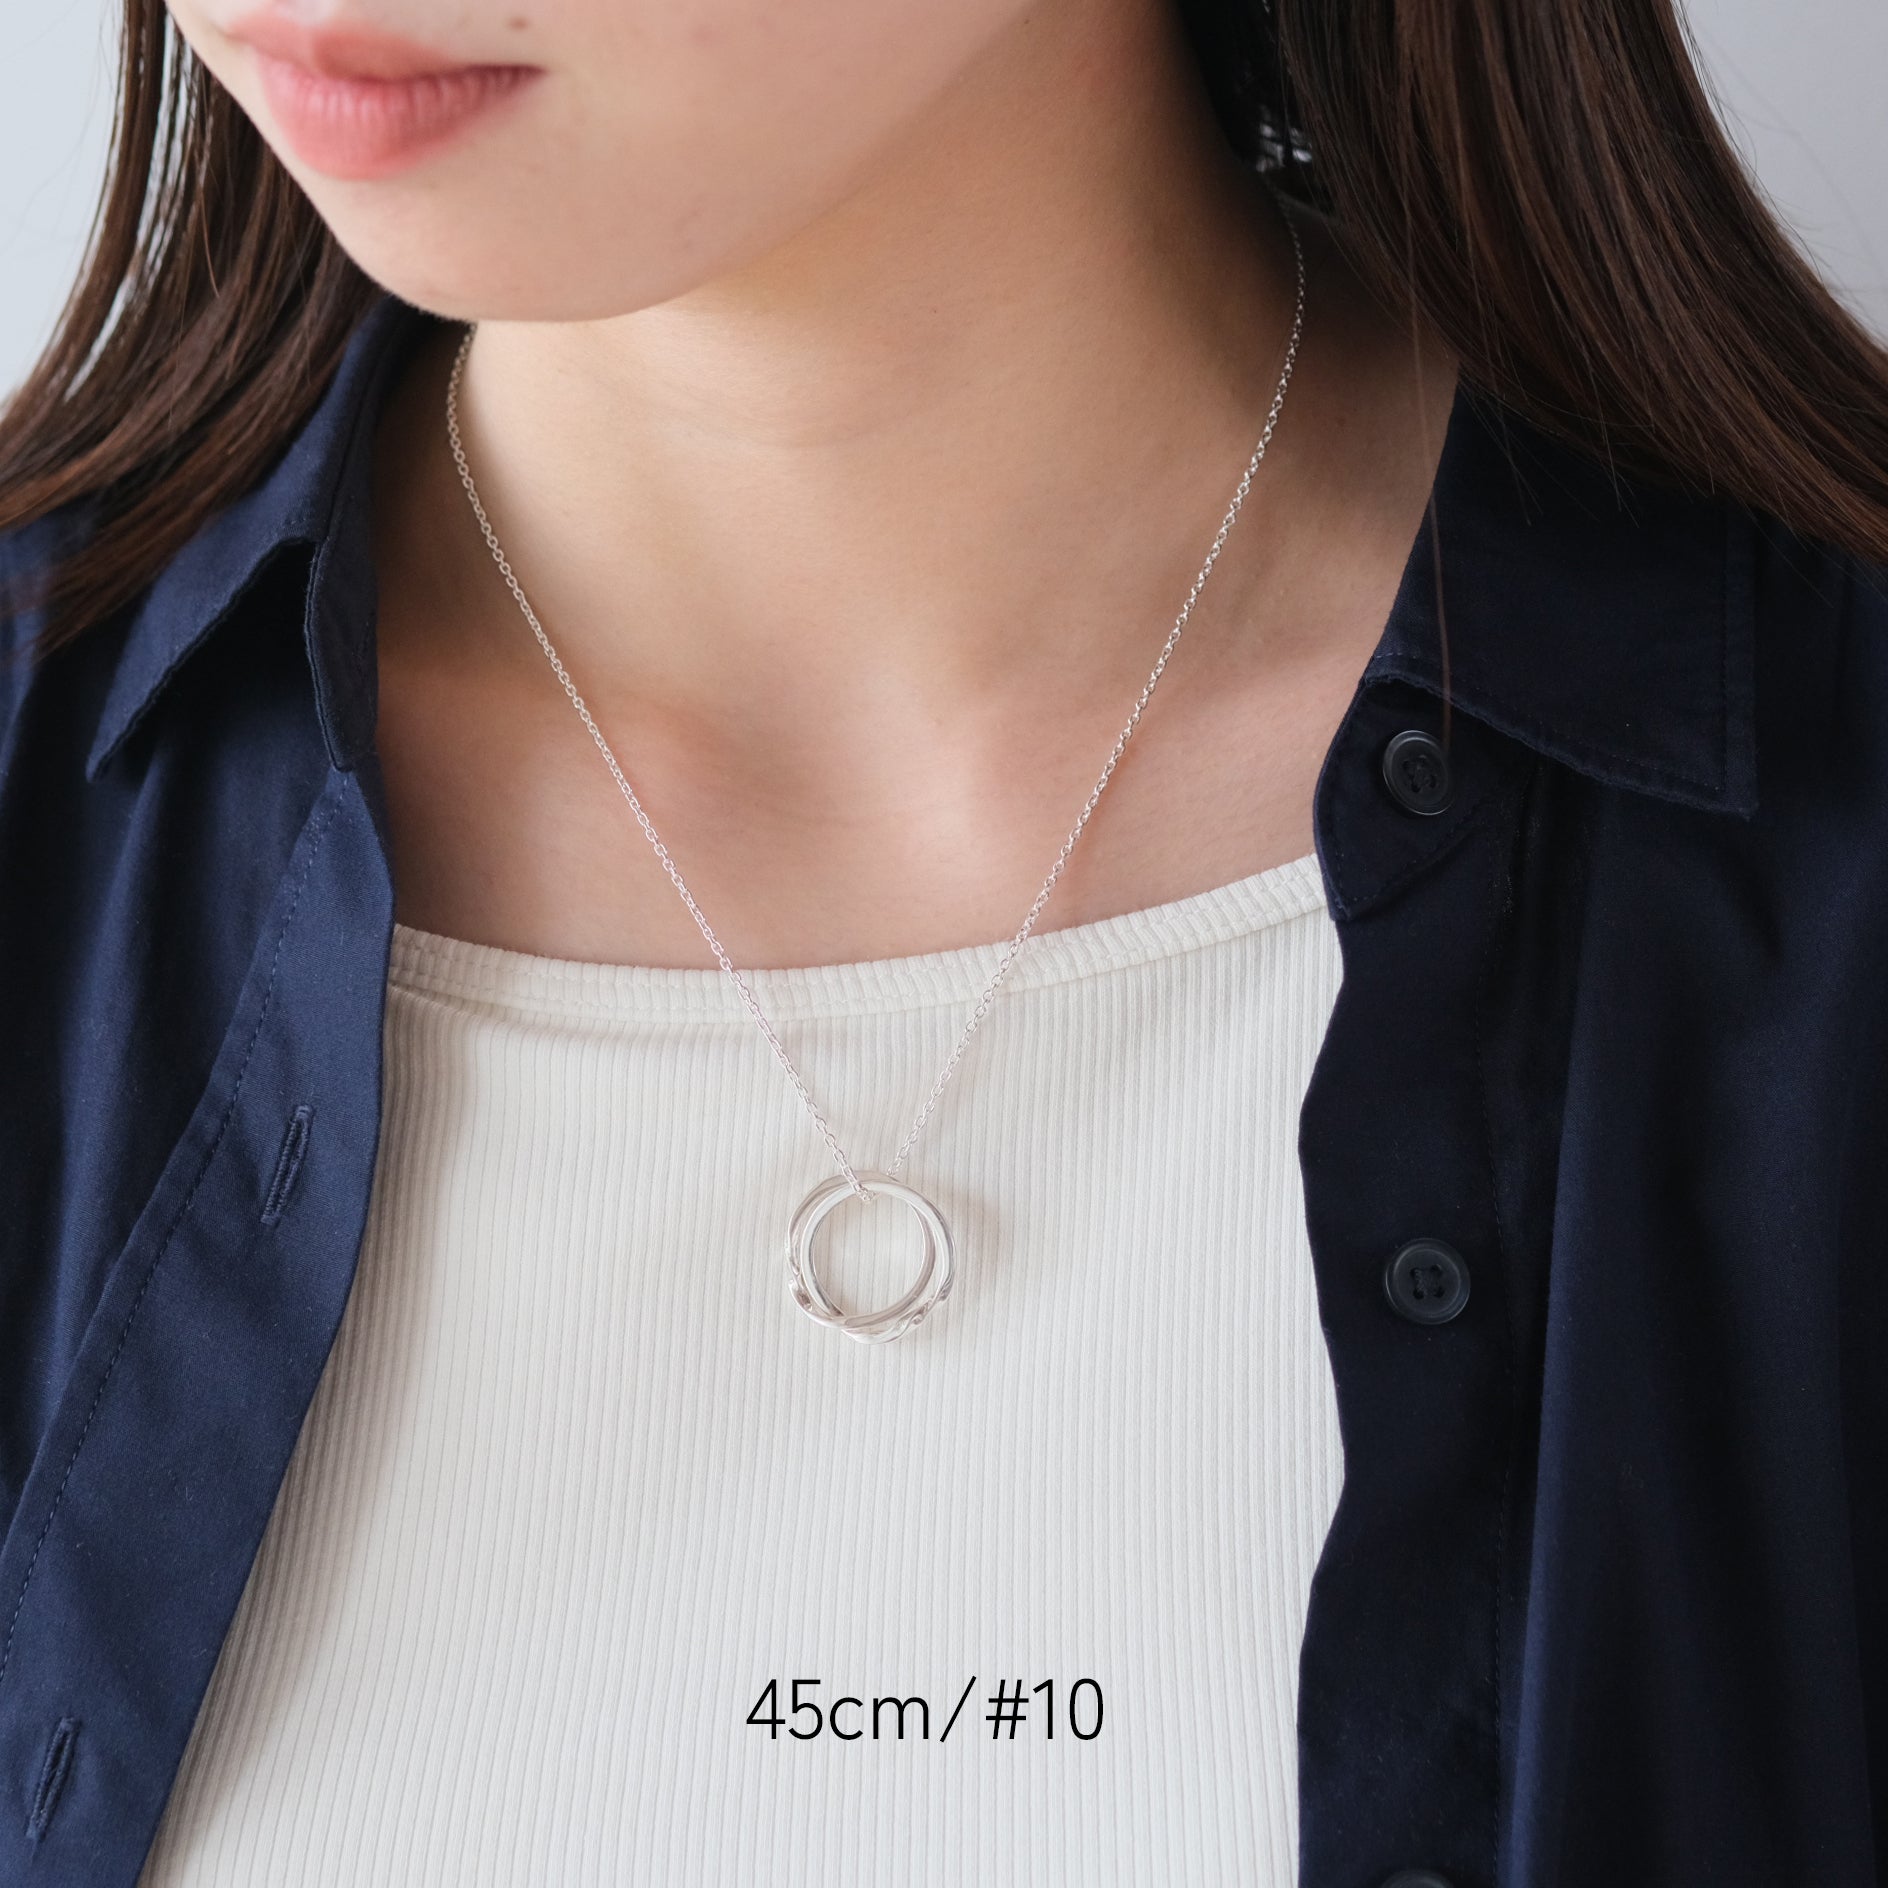 ACE by morizane: acegimmel necklace［AG920603 Sterling silver］ネックレス/リング